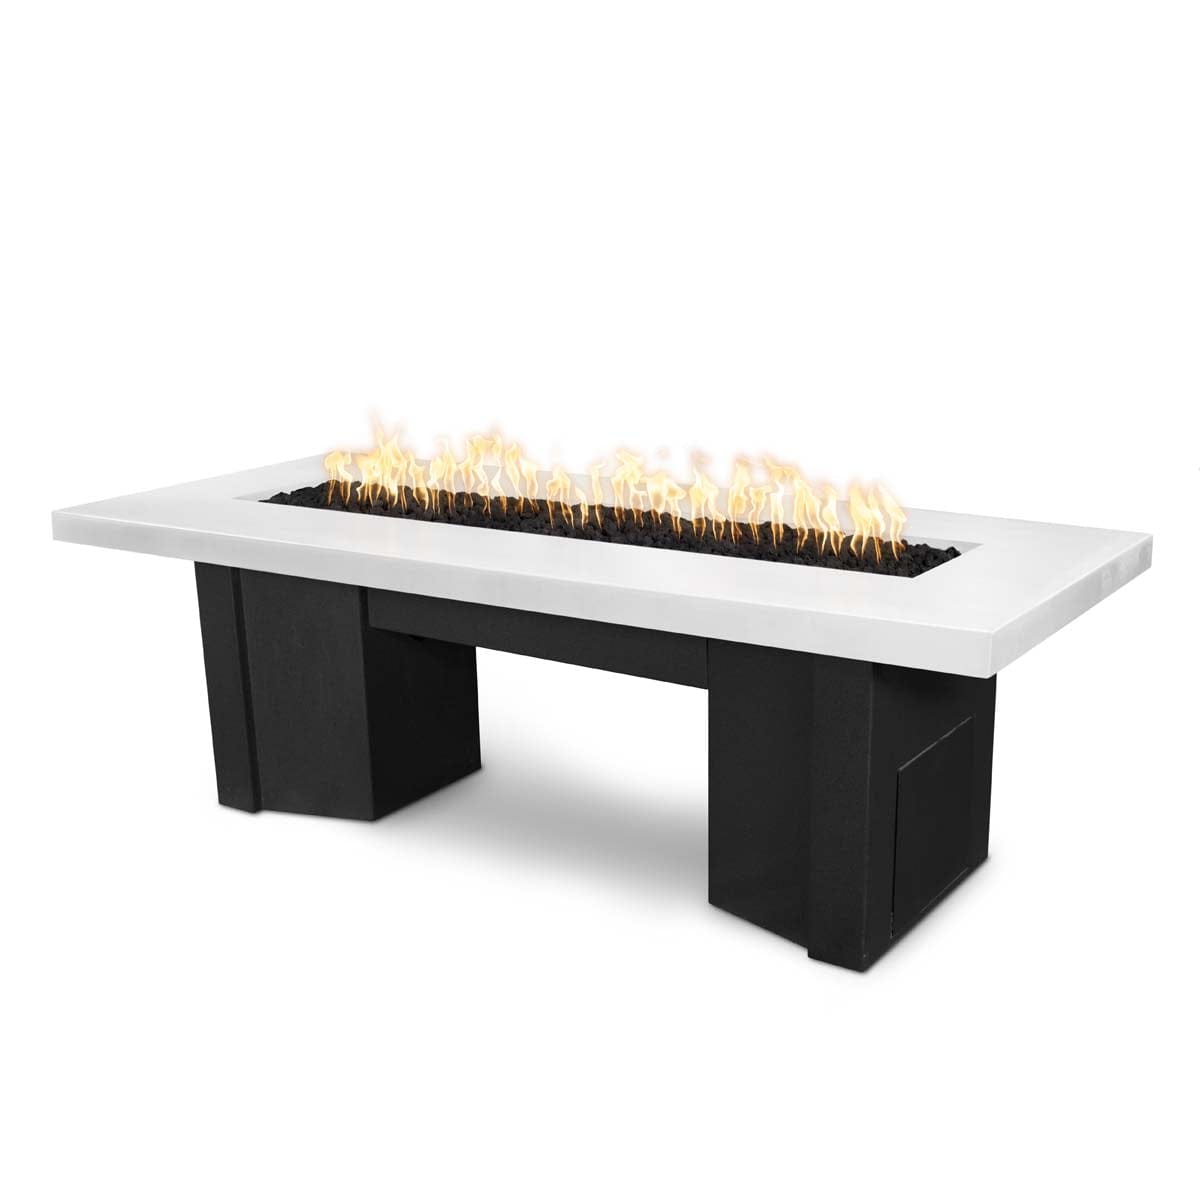 The Outdoor Plus Fire Features Limestone (-LIM) / Black Powder Coated Steel (-BLK) The Outdoor Plus 60&quot; Alameda Fire Table Smooth Concrete in Natural Gas - Flame Sense System with Push Button Spark Igniter / OPT-ALMGFRC60FSEN-NG